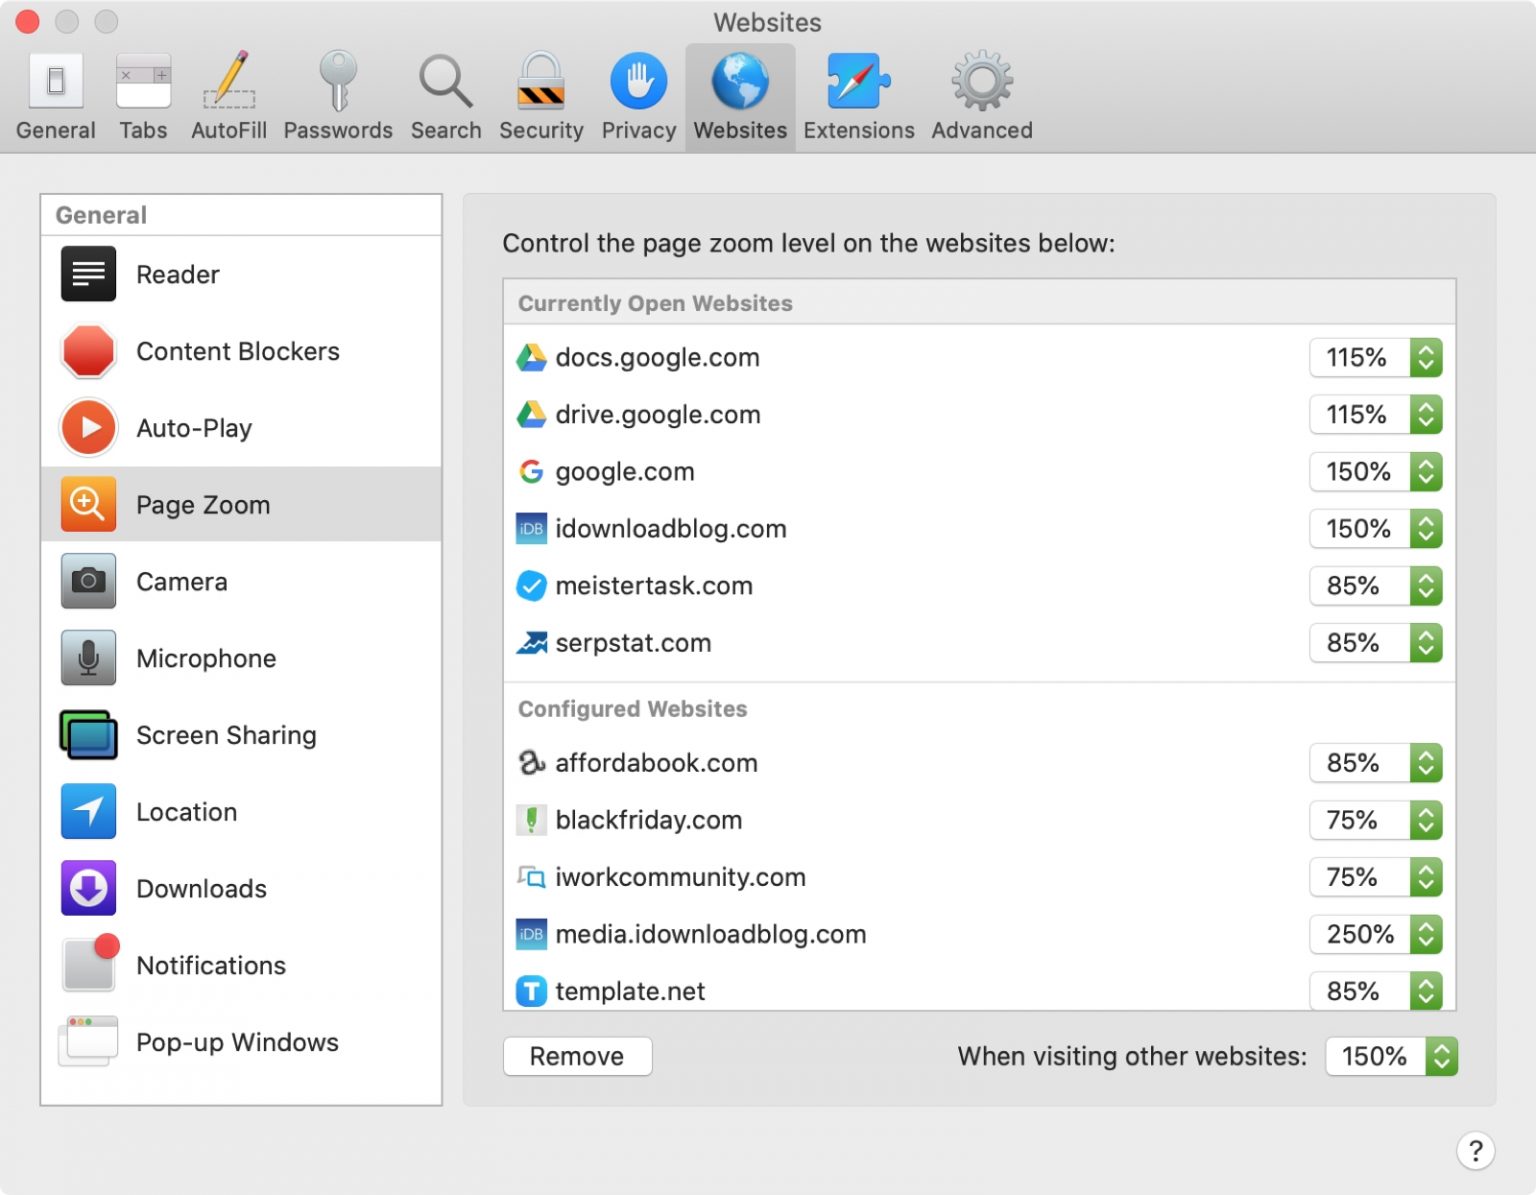 how to download zoom for mac